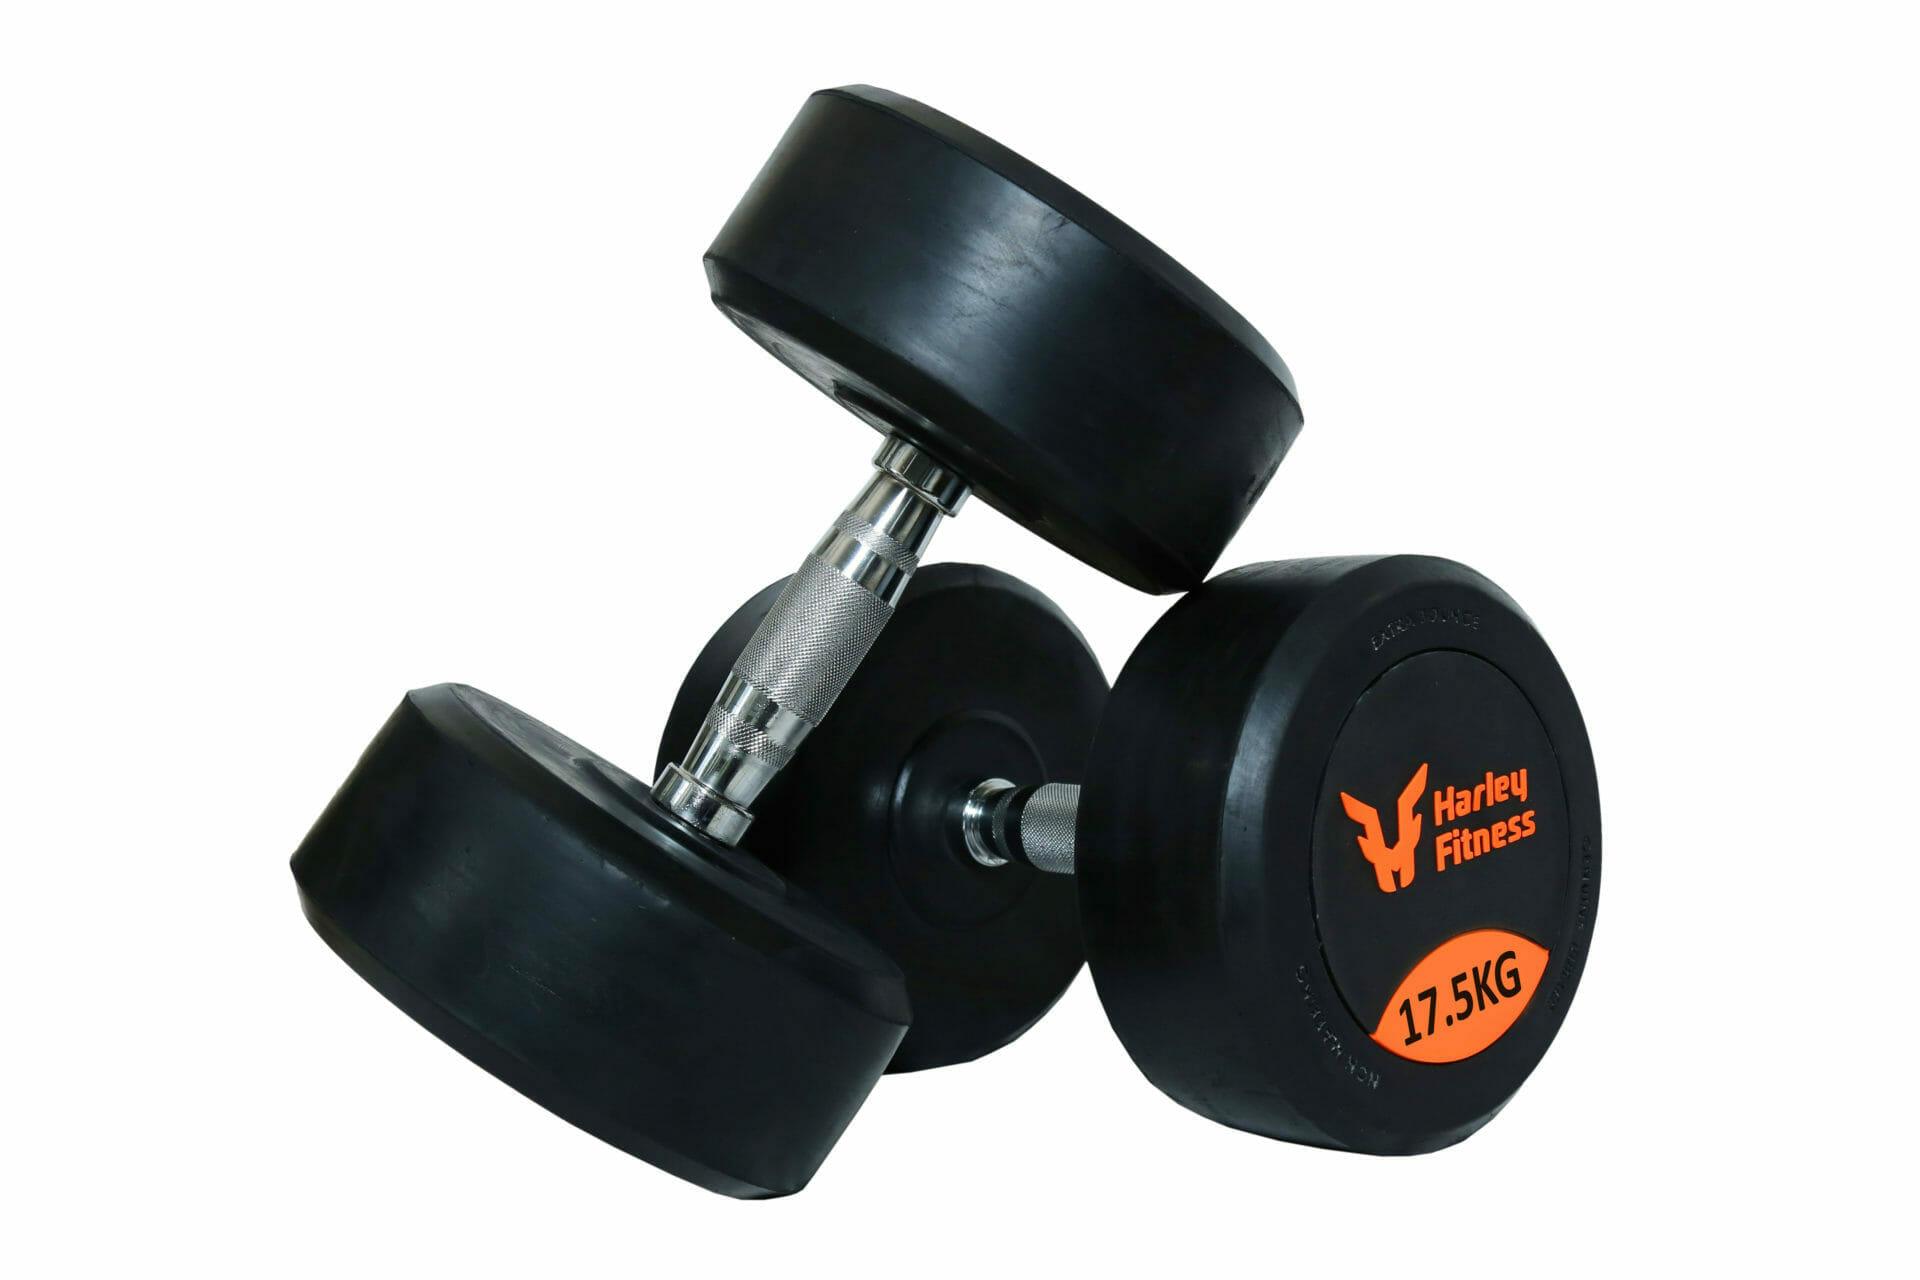 Harley Fitness 17.50kg Premium Rubber Coated Bouncing Round Dumbbells 1 Pair